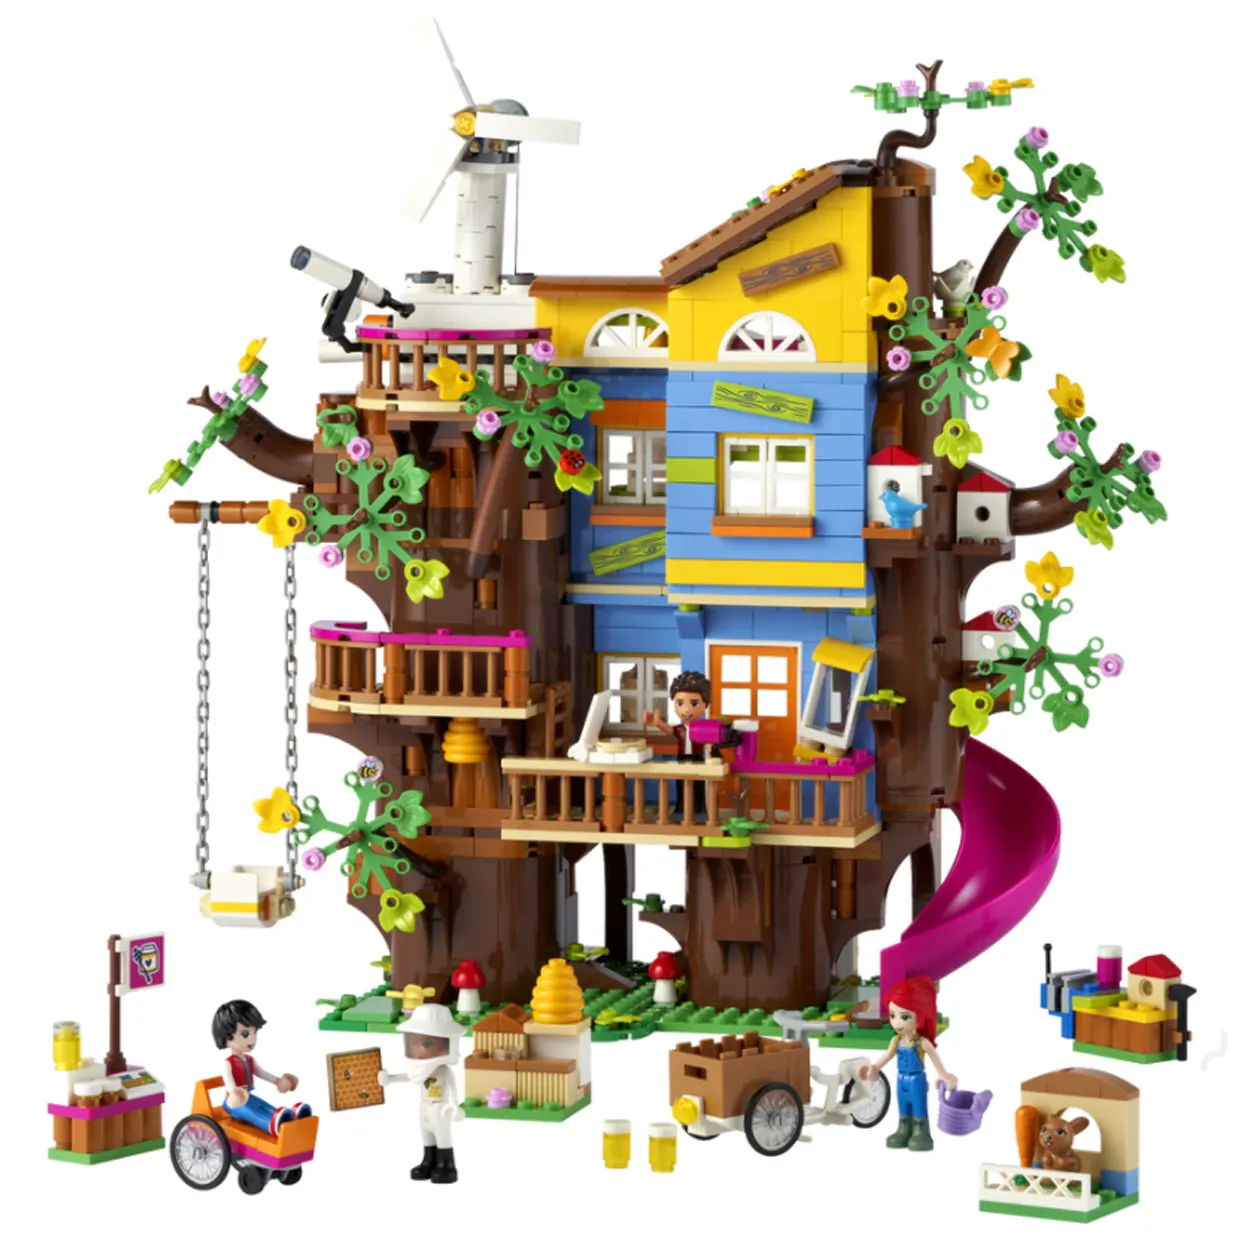 LEGO Friends New Sets for Jan. 1st 2022 Revealed | Big Apartment, House Boat and more